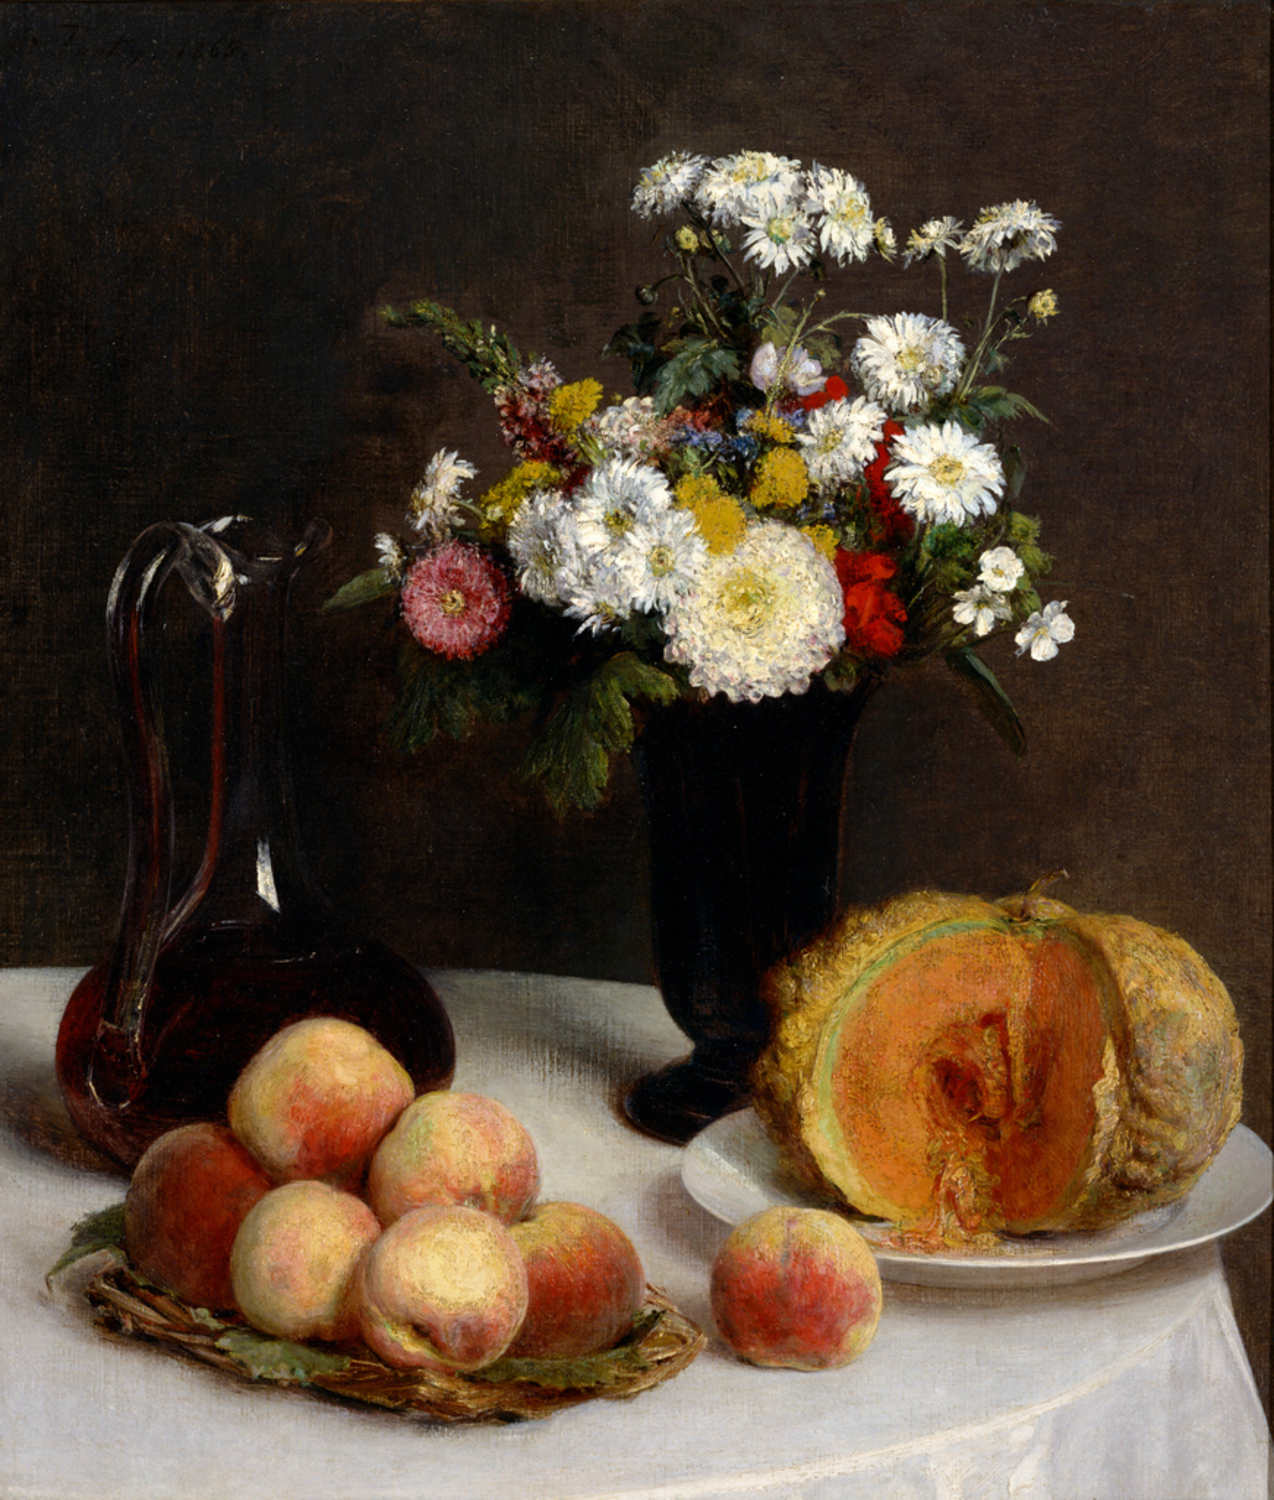 Still Life with a Carafe, Flowers and Fruit by Henri Fantin-Latour - 1865 - 51.5 x 59 cm The National Museum of Western Art, Tokyo